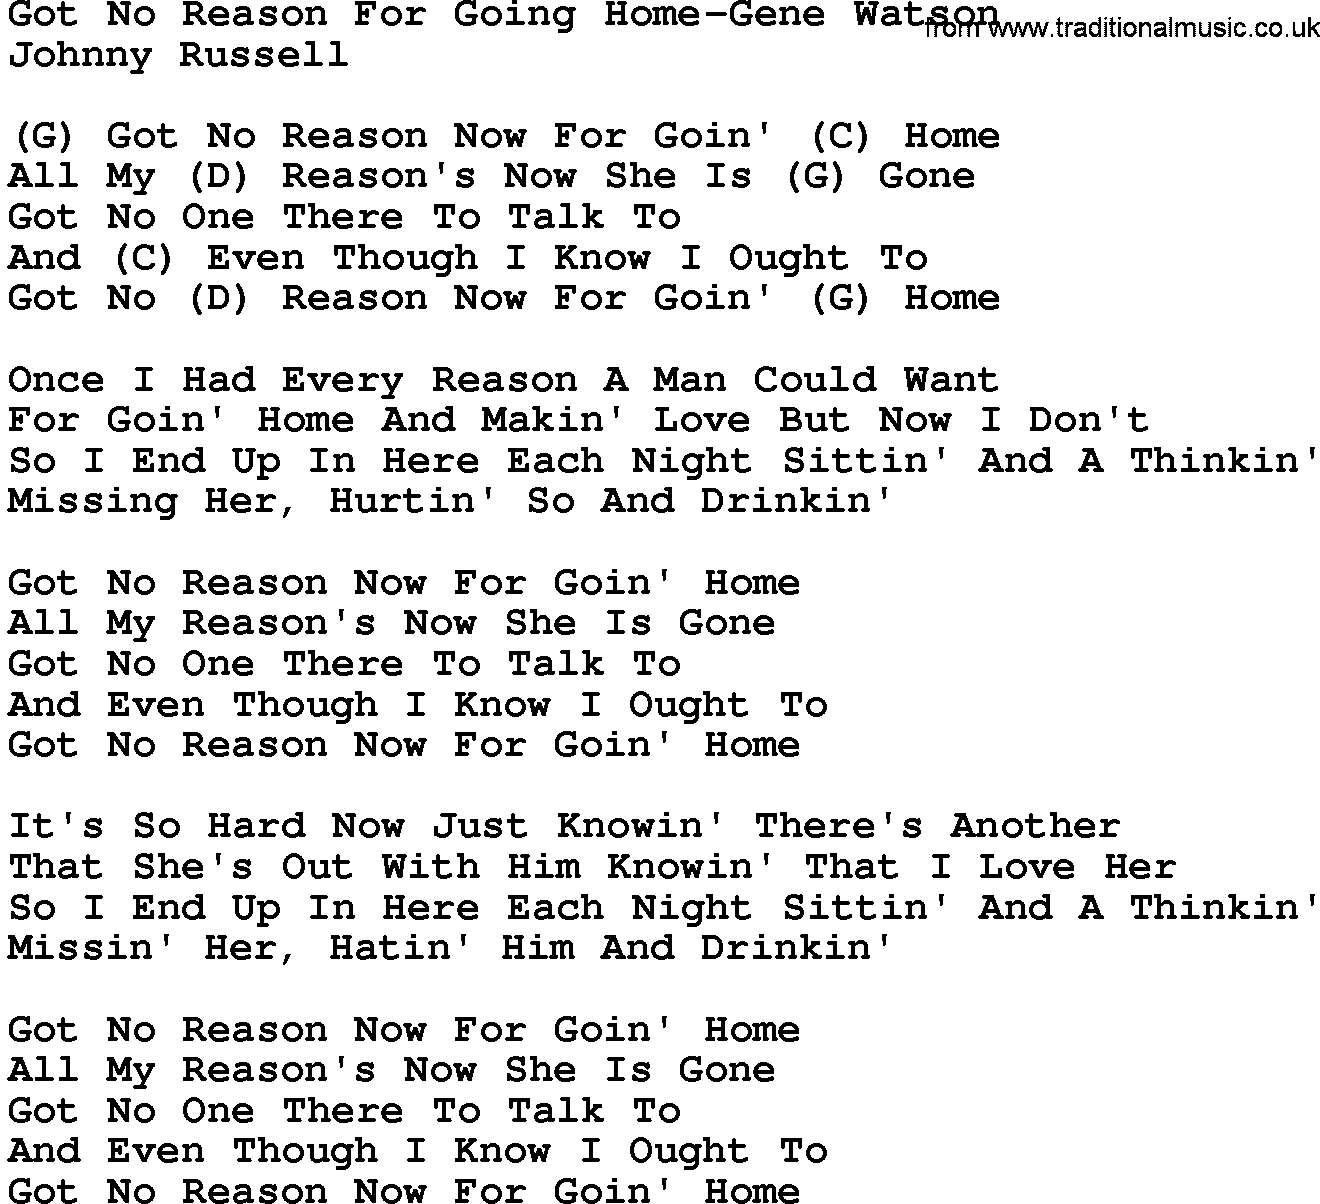 Country music song: Got No Reason For Going Home-Gene Watson lyrics and chords